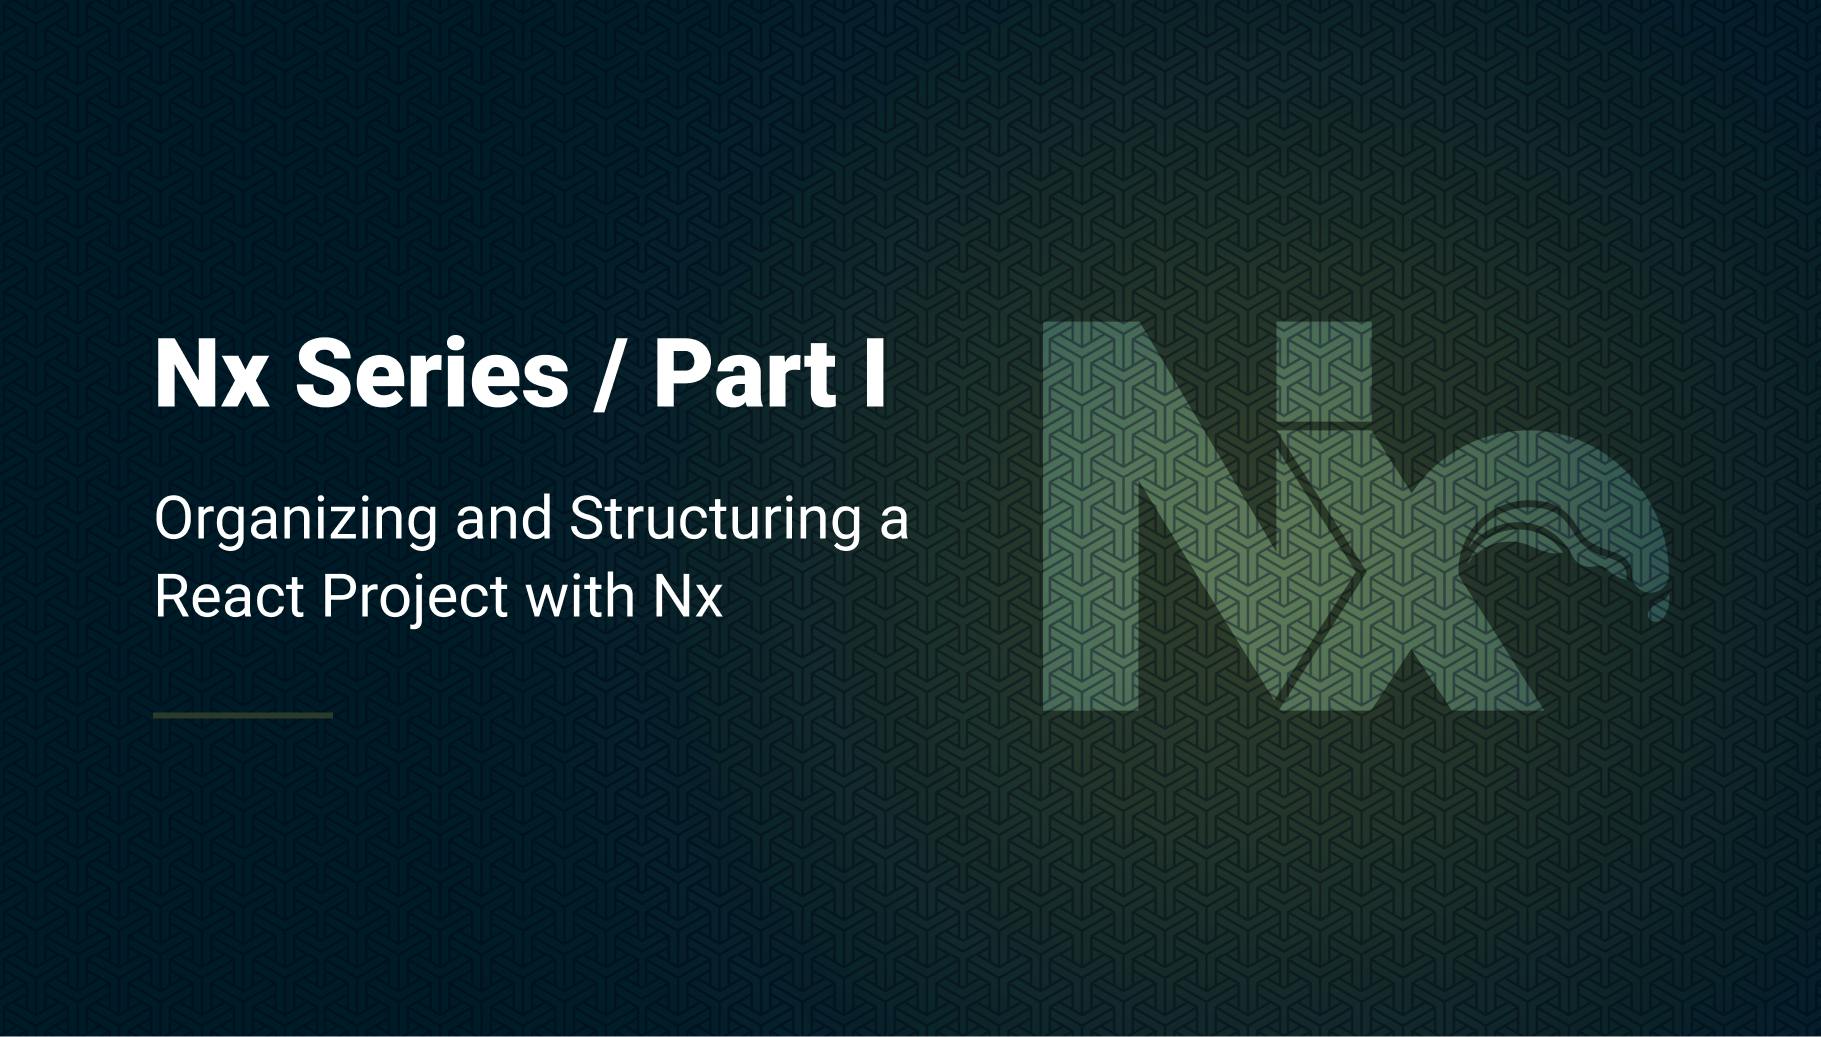 Nx Architecture Part-1: Organizing and Structuring a React Project with Nx - Qovery